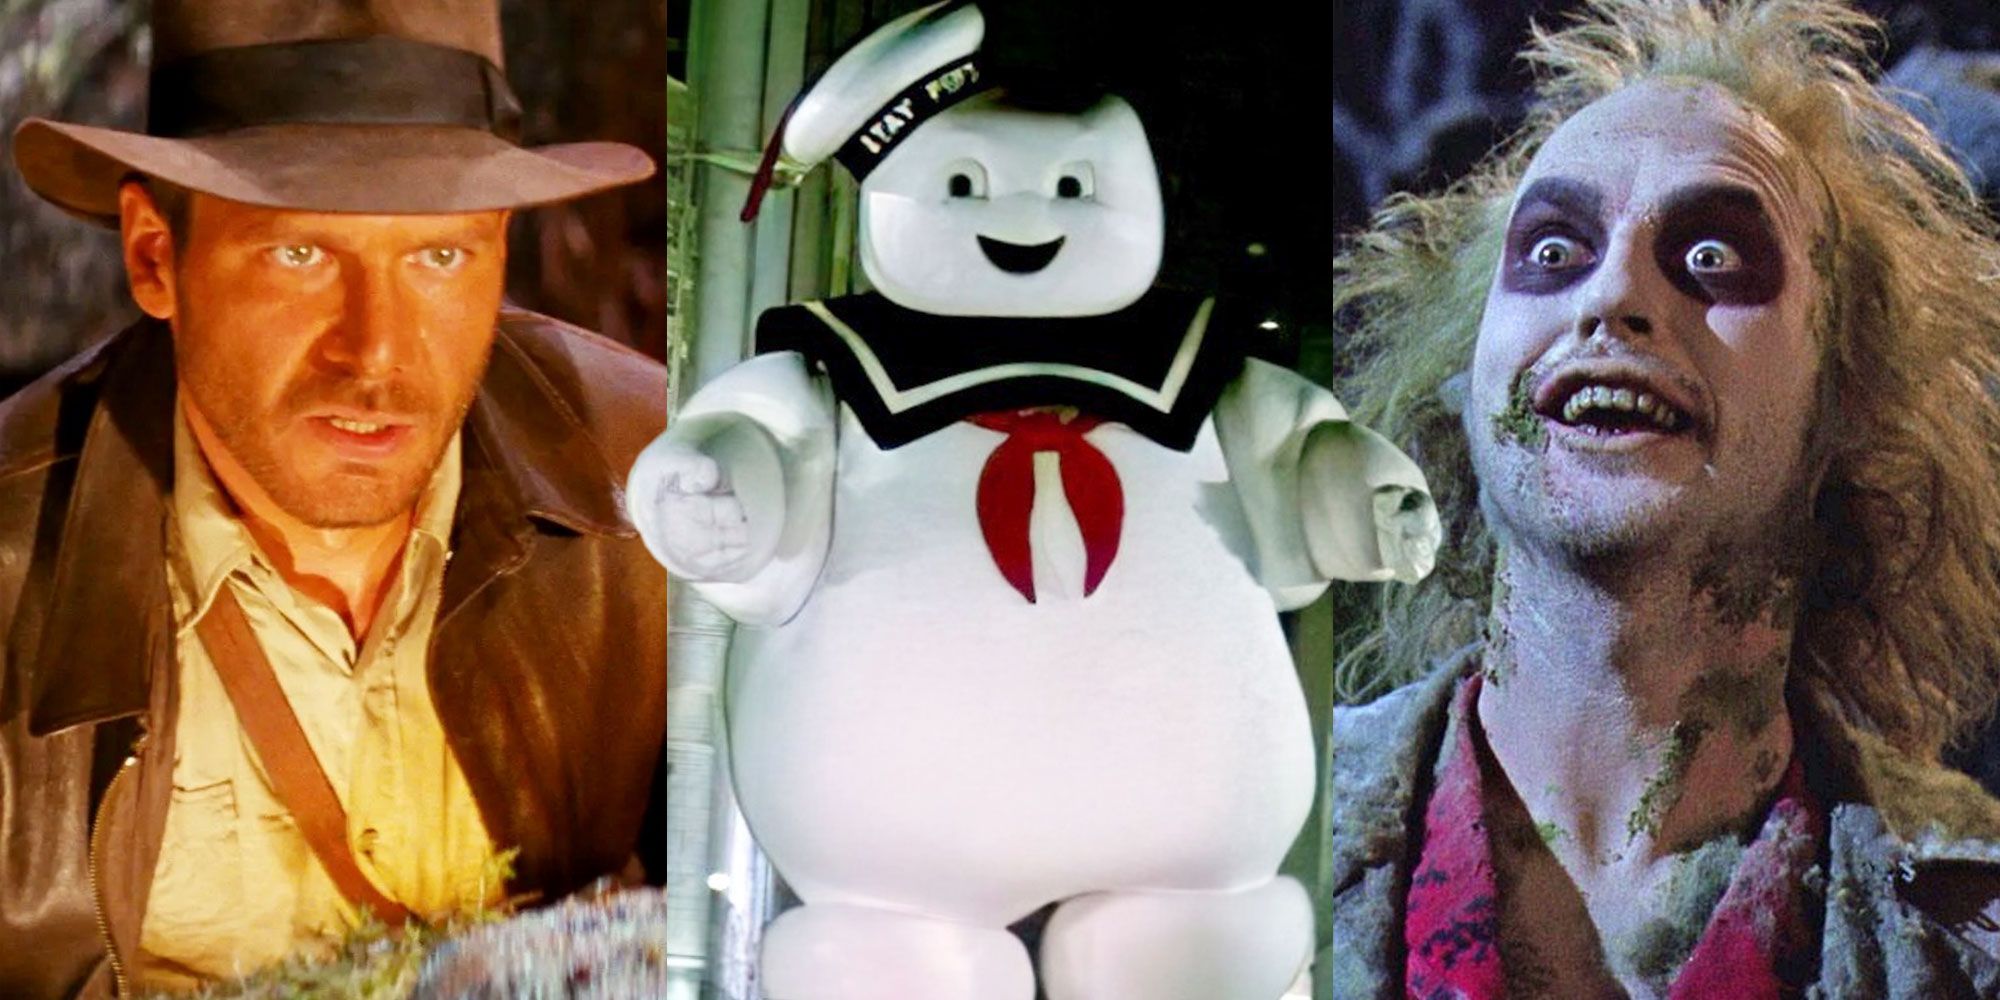 Three side by side images from Indiana Jones, Ghostbusters and Beetlejuice.